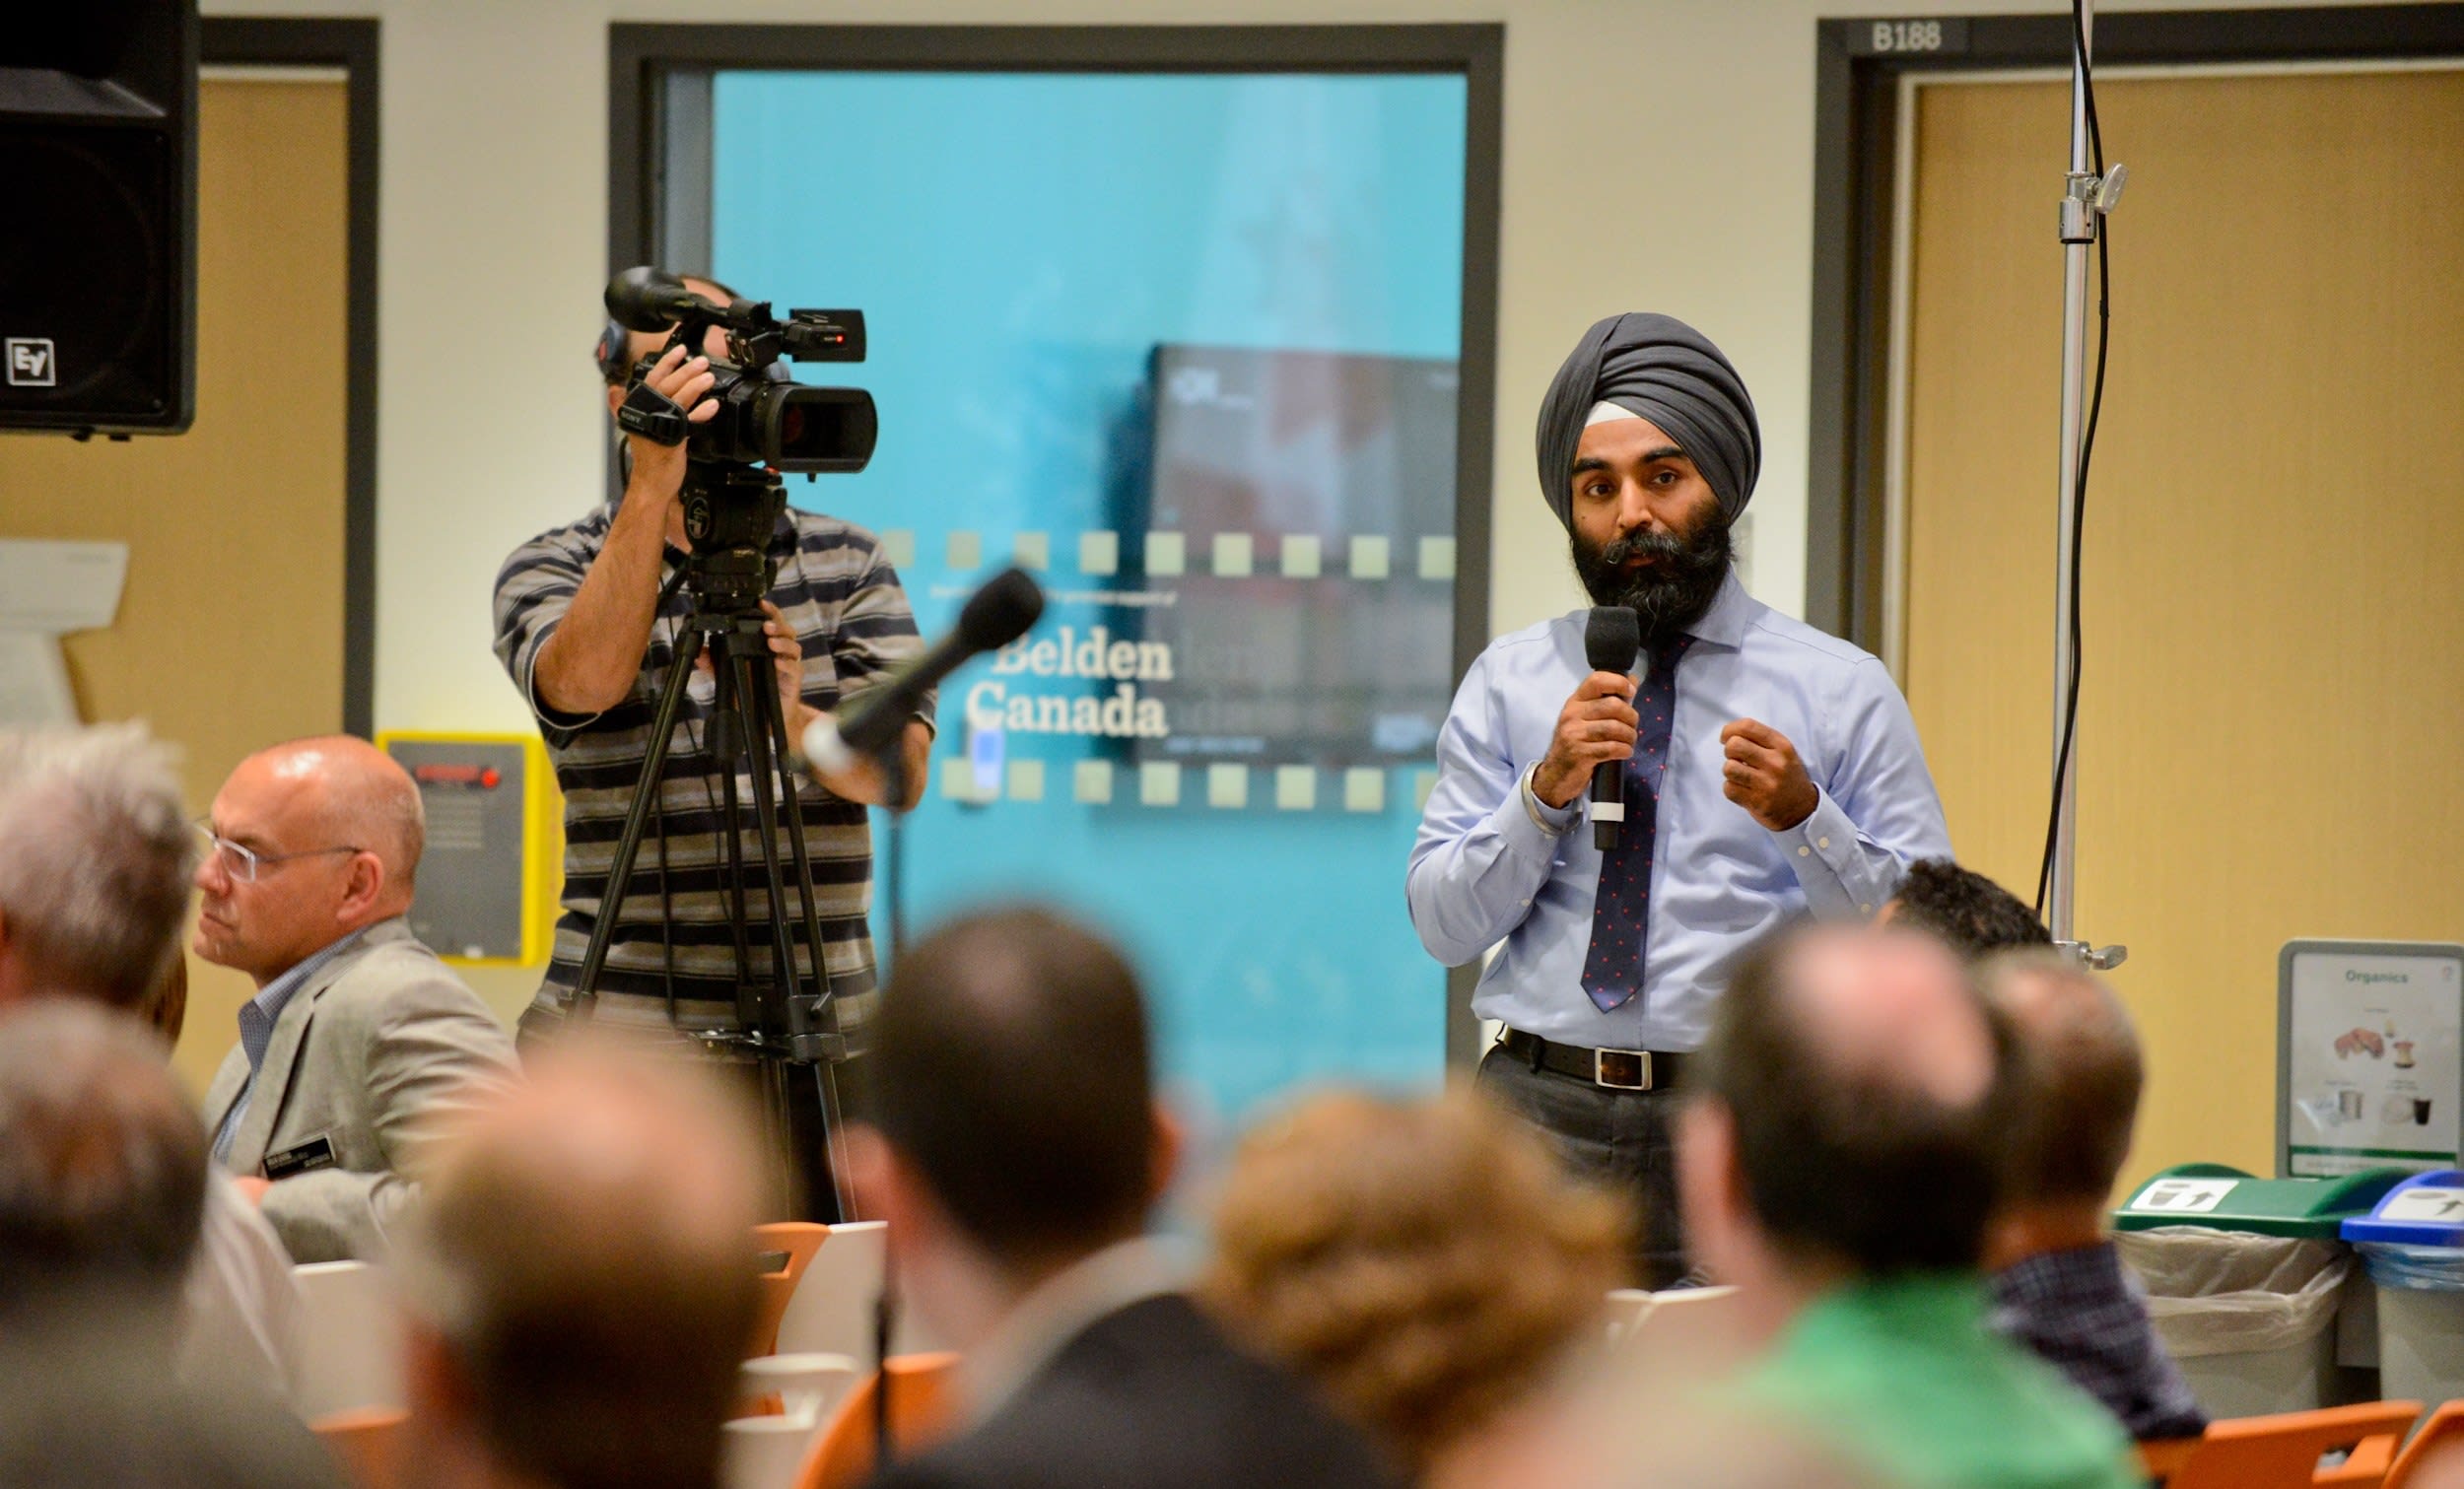 Darshpreet Bhatti stands up to answer a question before the crowd.